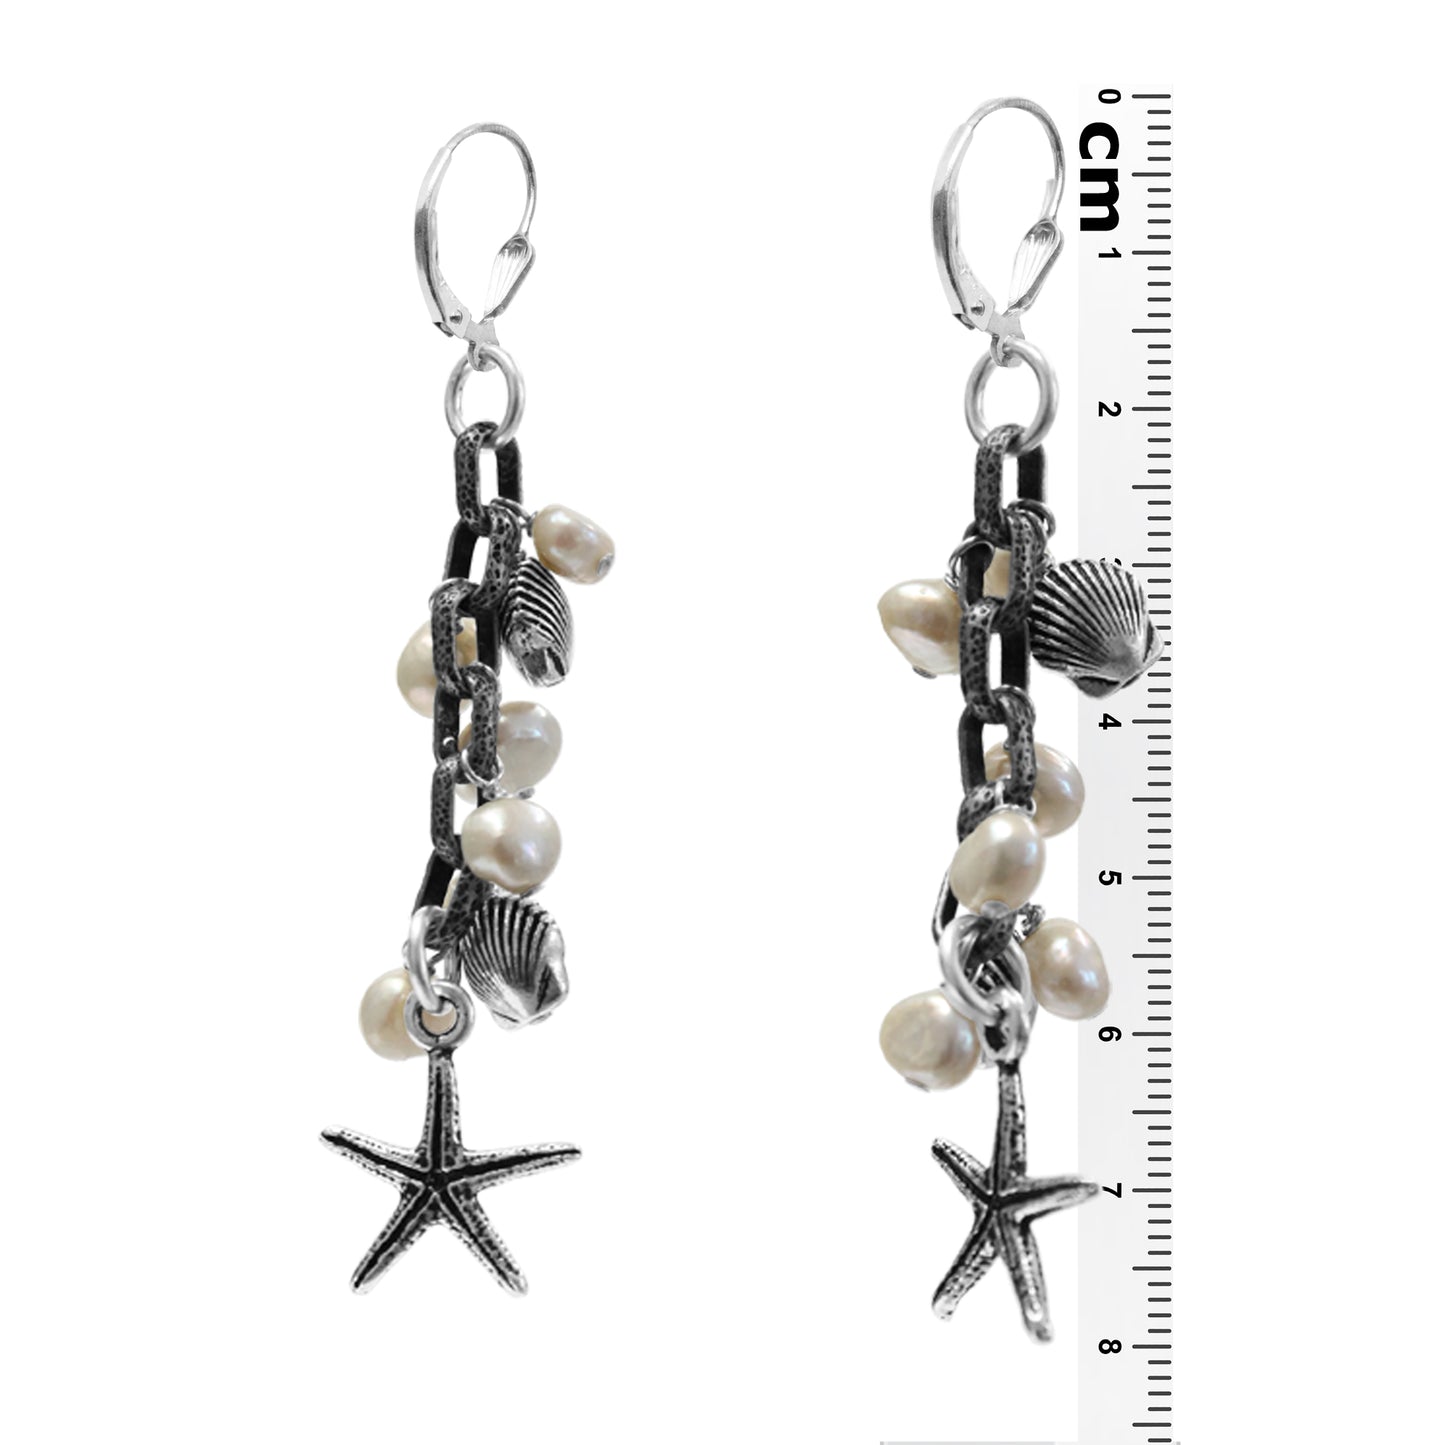 Beach Charm Earrings / choose from 5 color options / 80mm length / leverback earwires